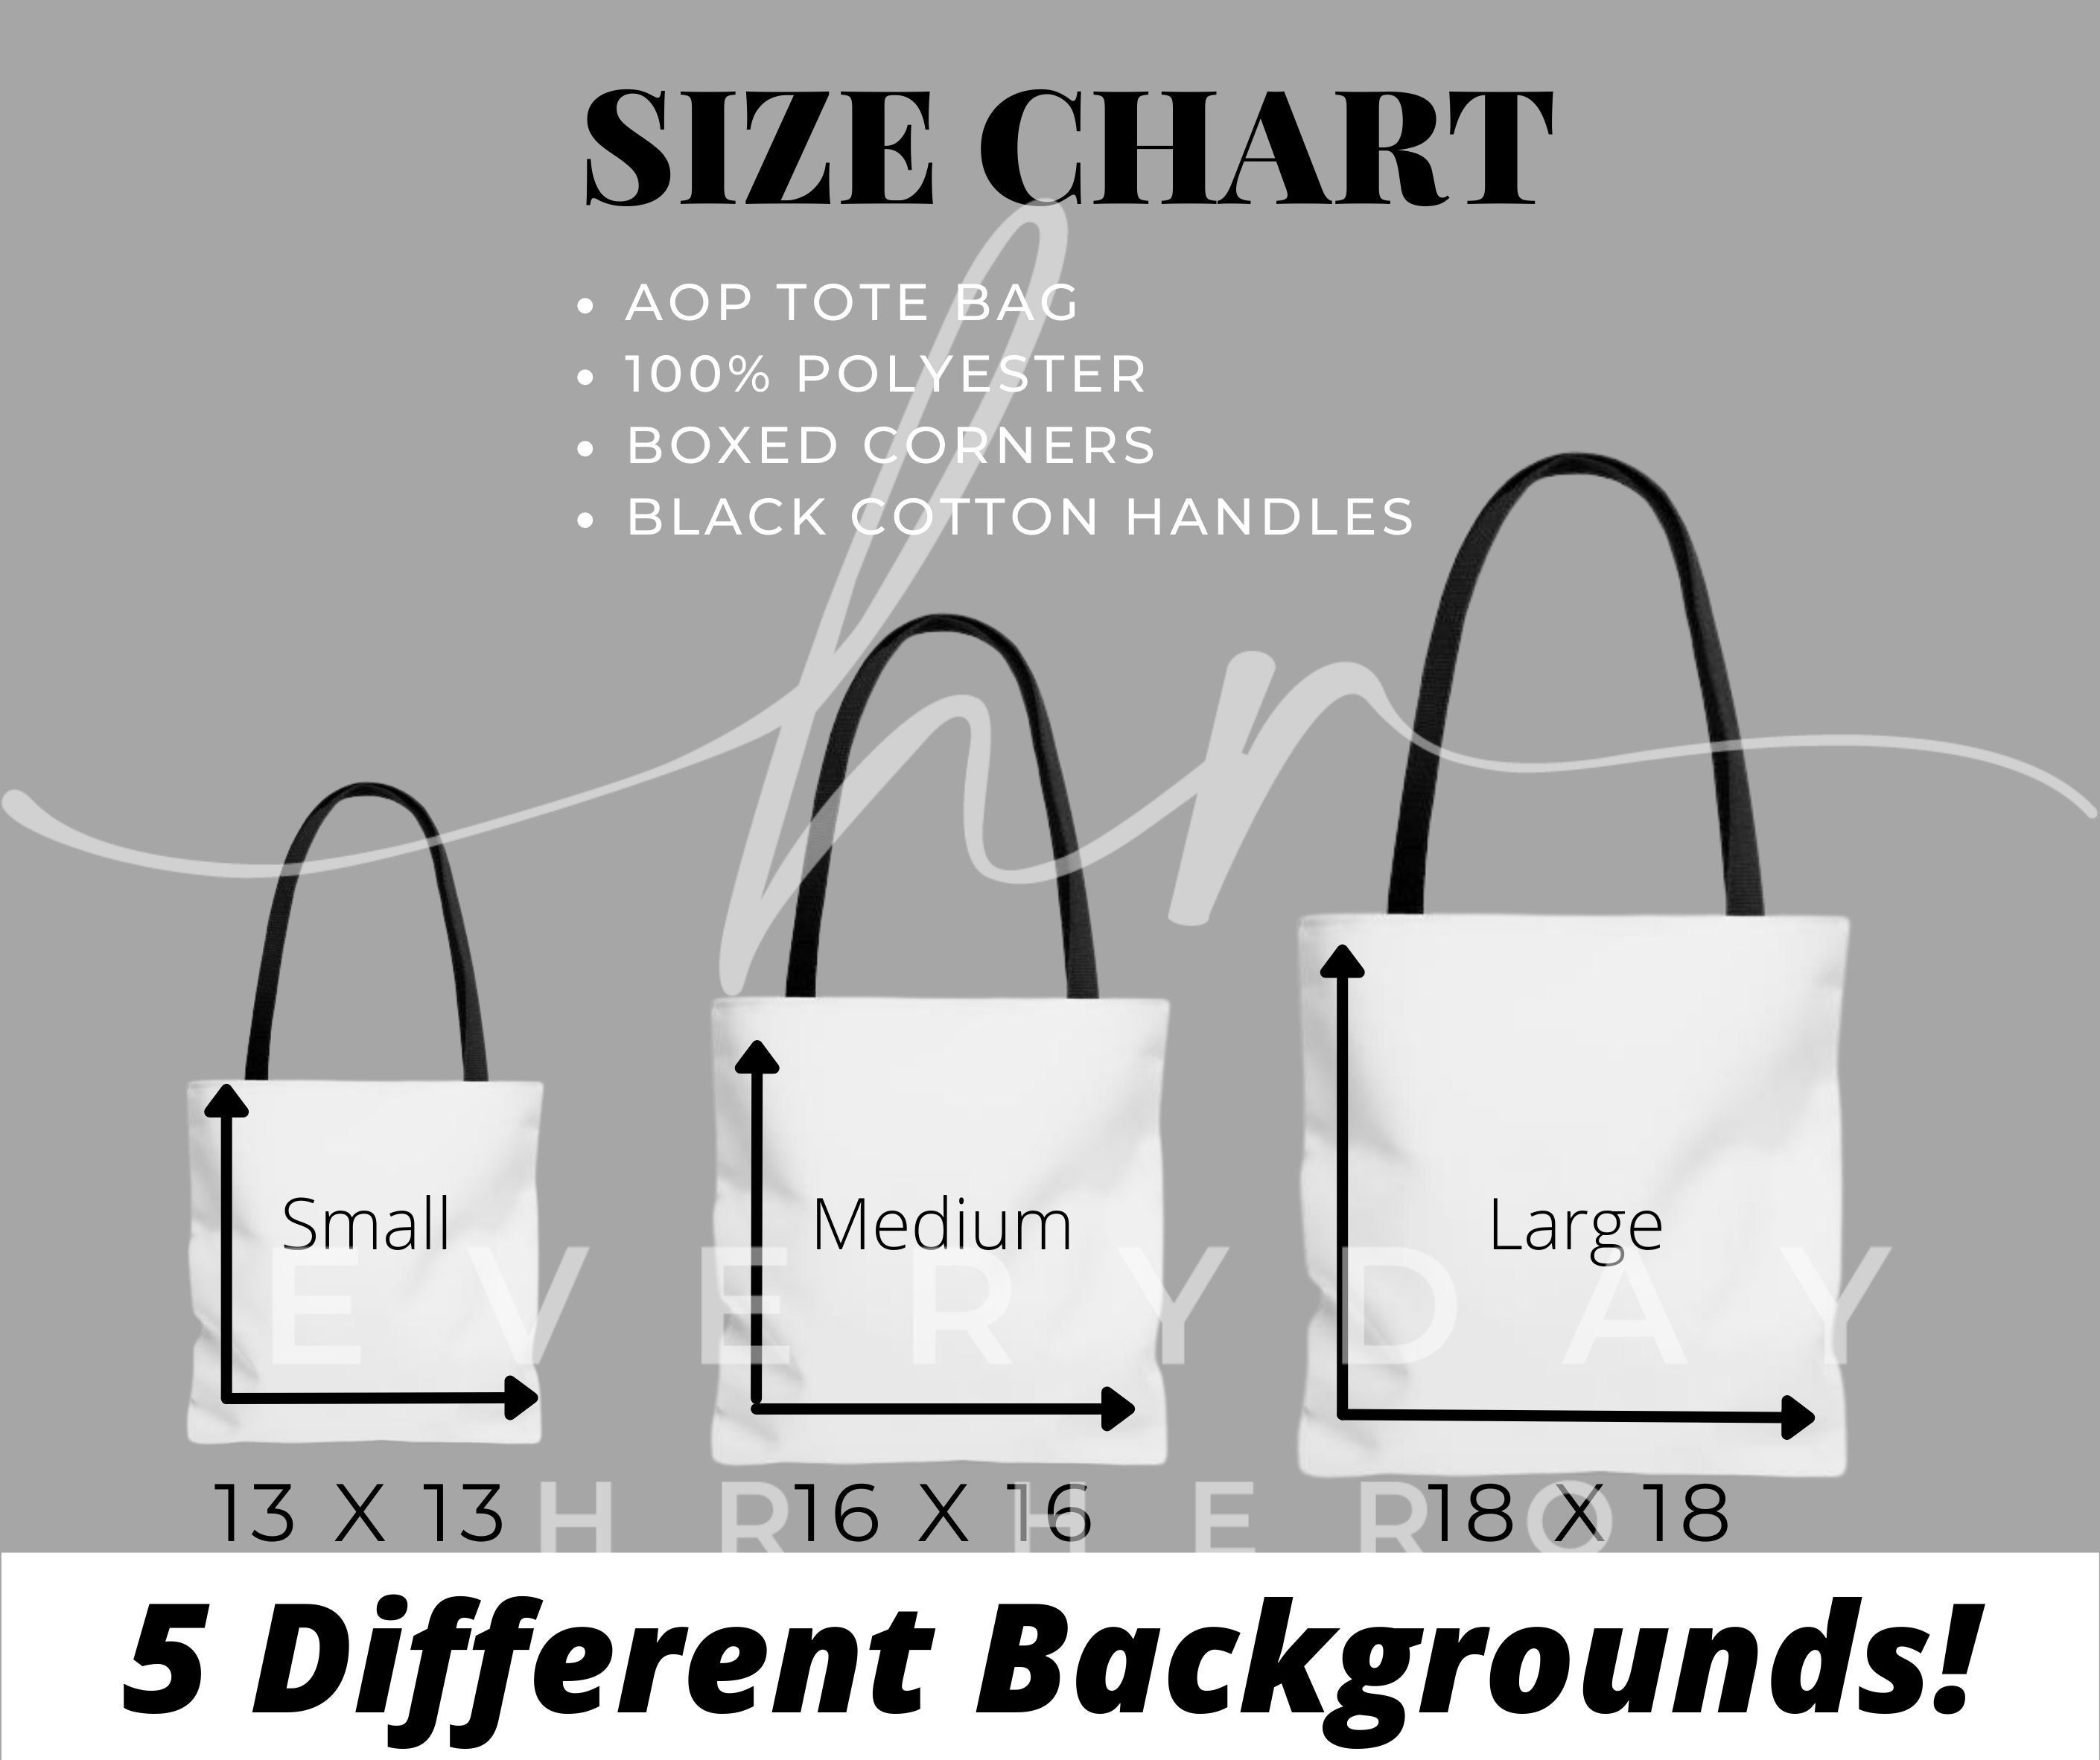 How to Measure a Purse Correctly | LoveToKnow